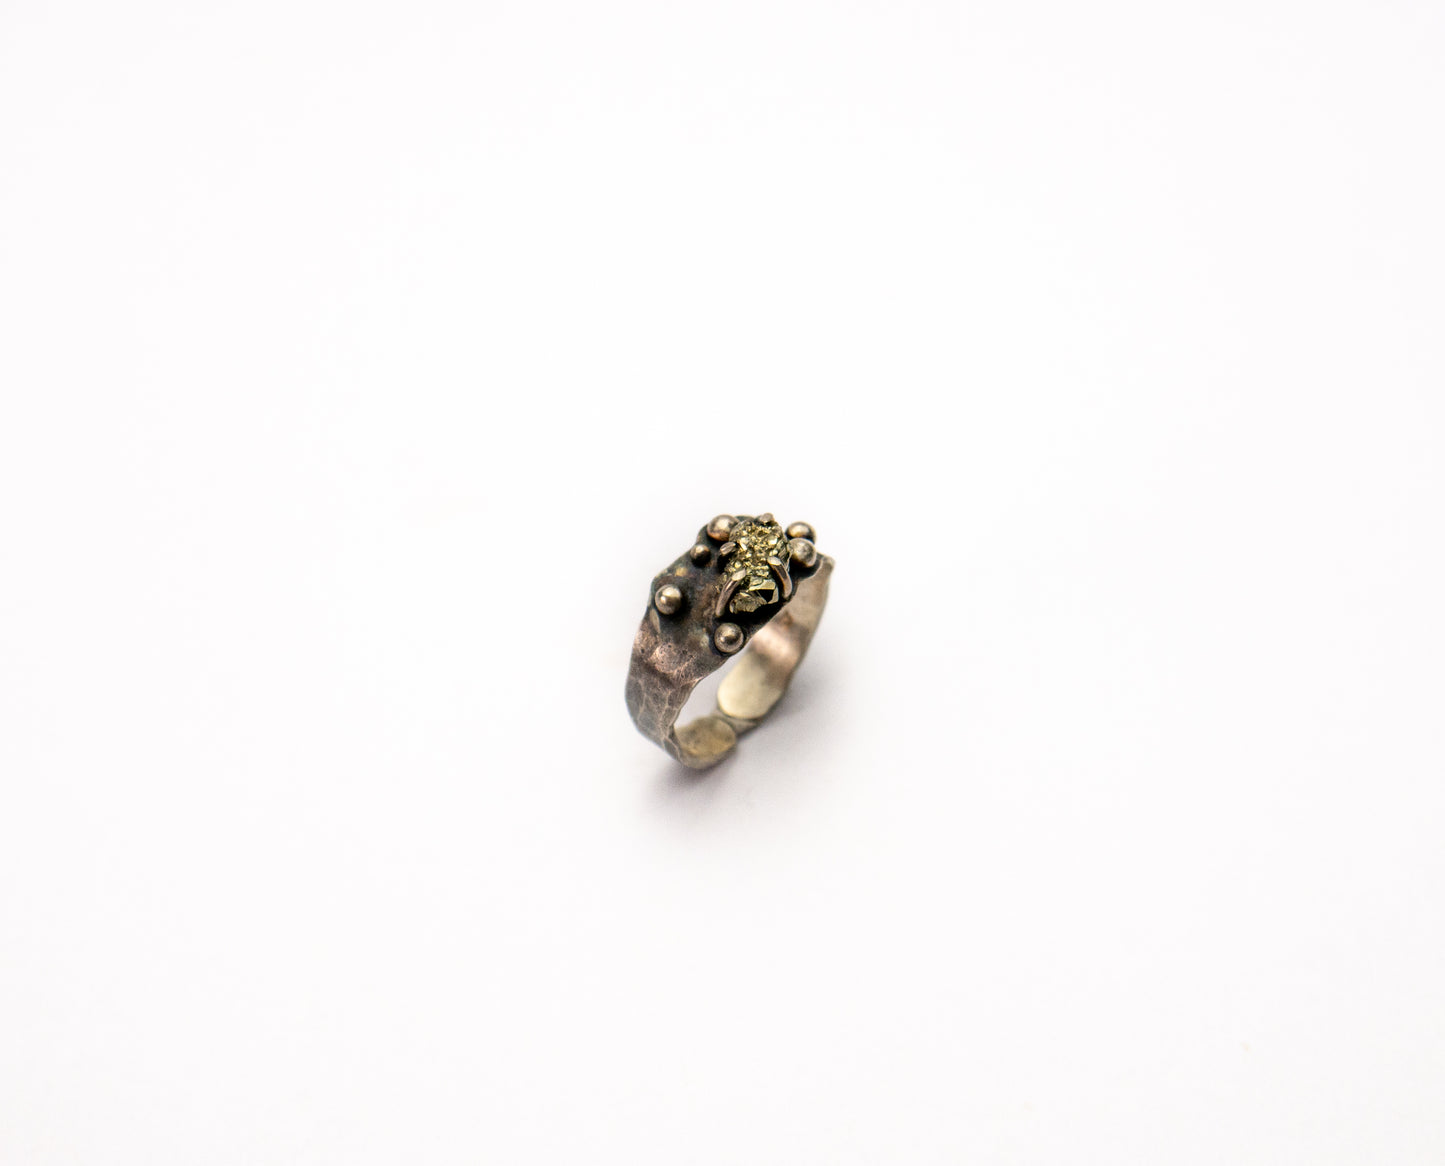 Raw pyrite sterling silver adjustable ring - OOAK ring